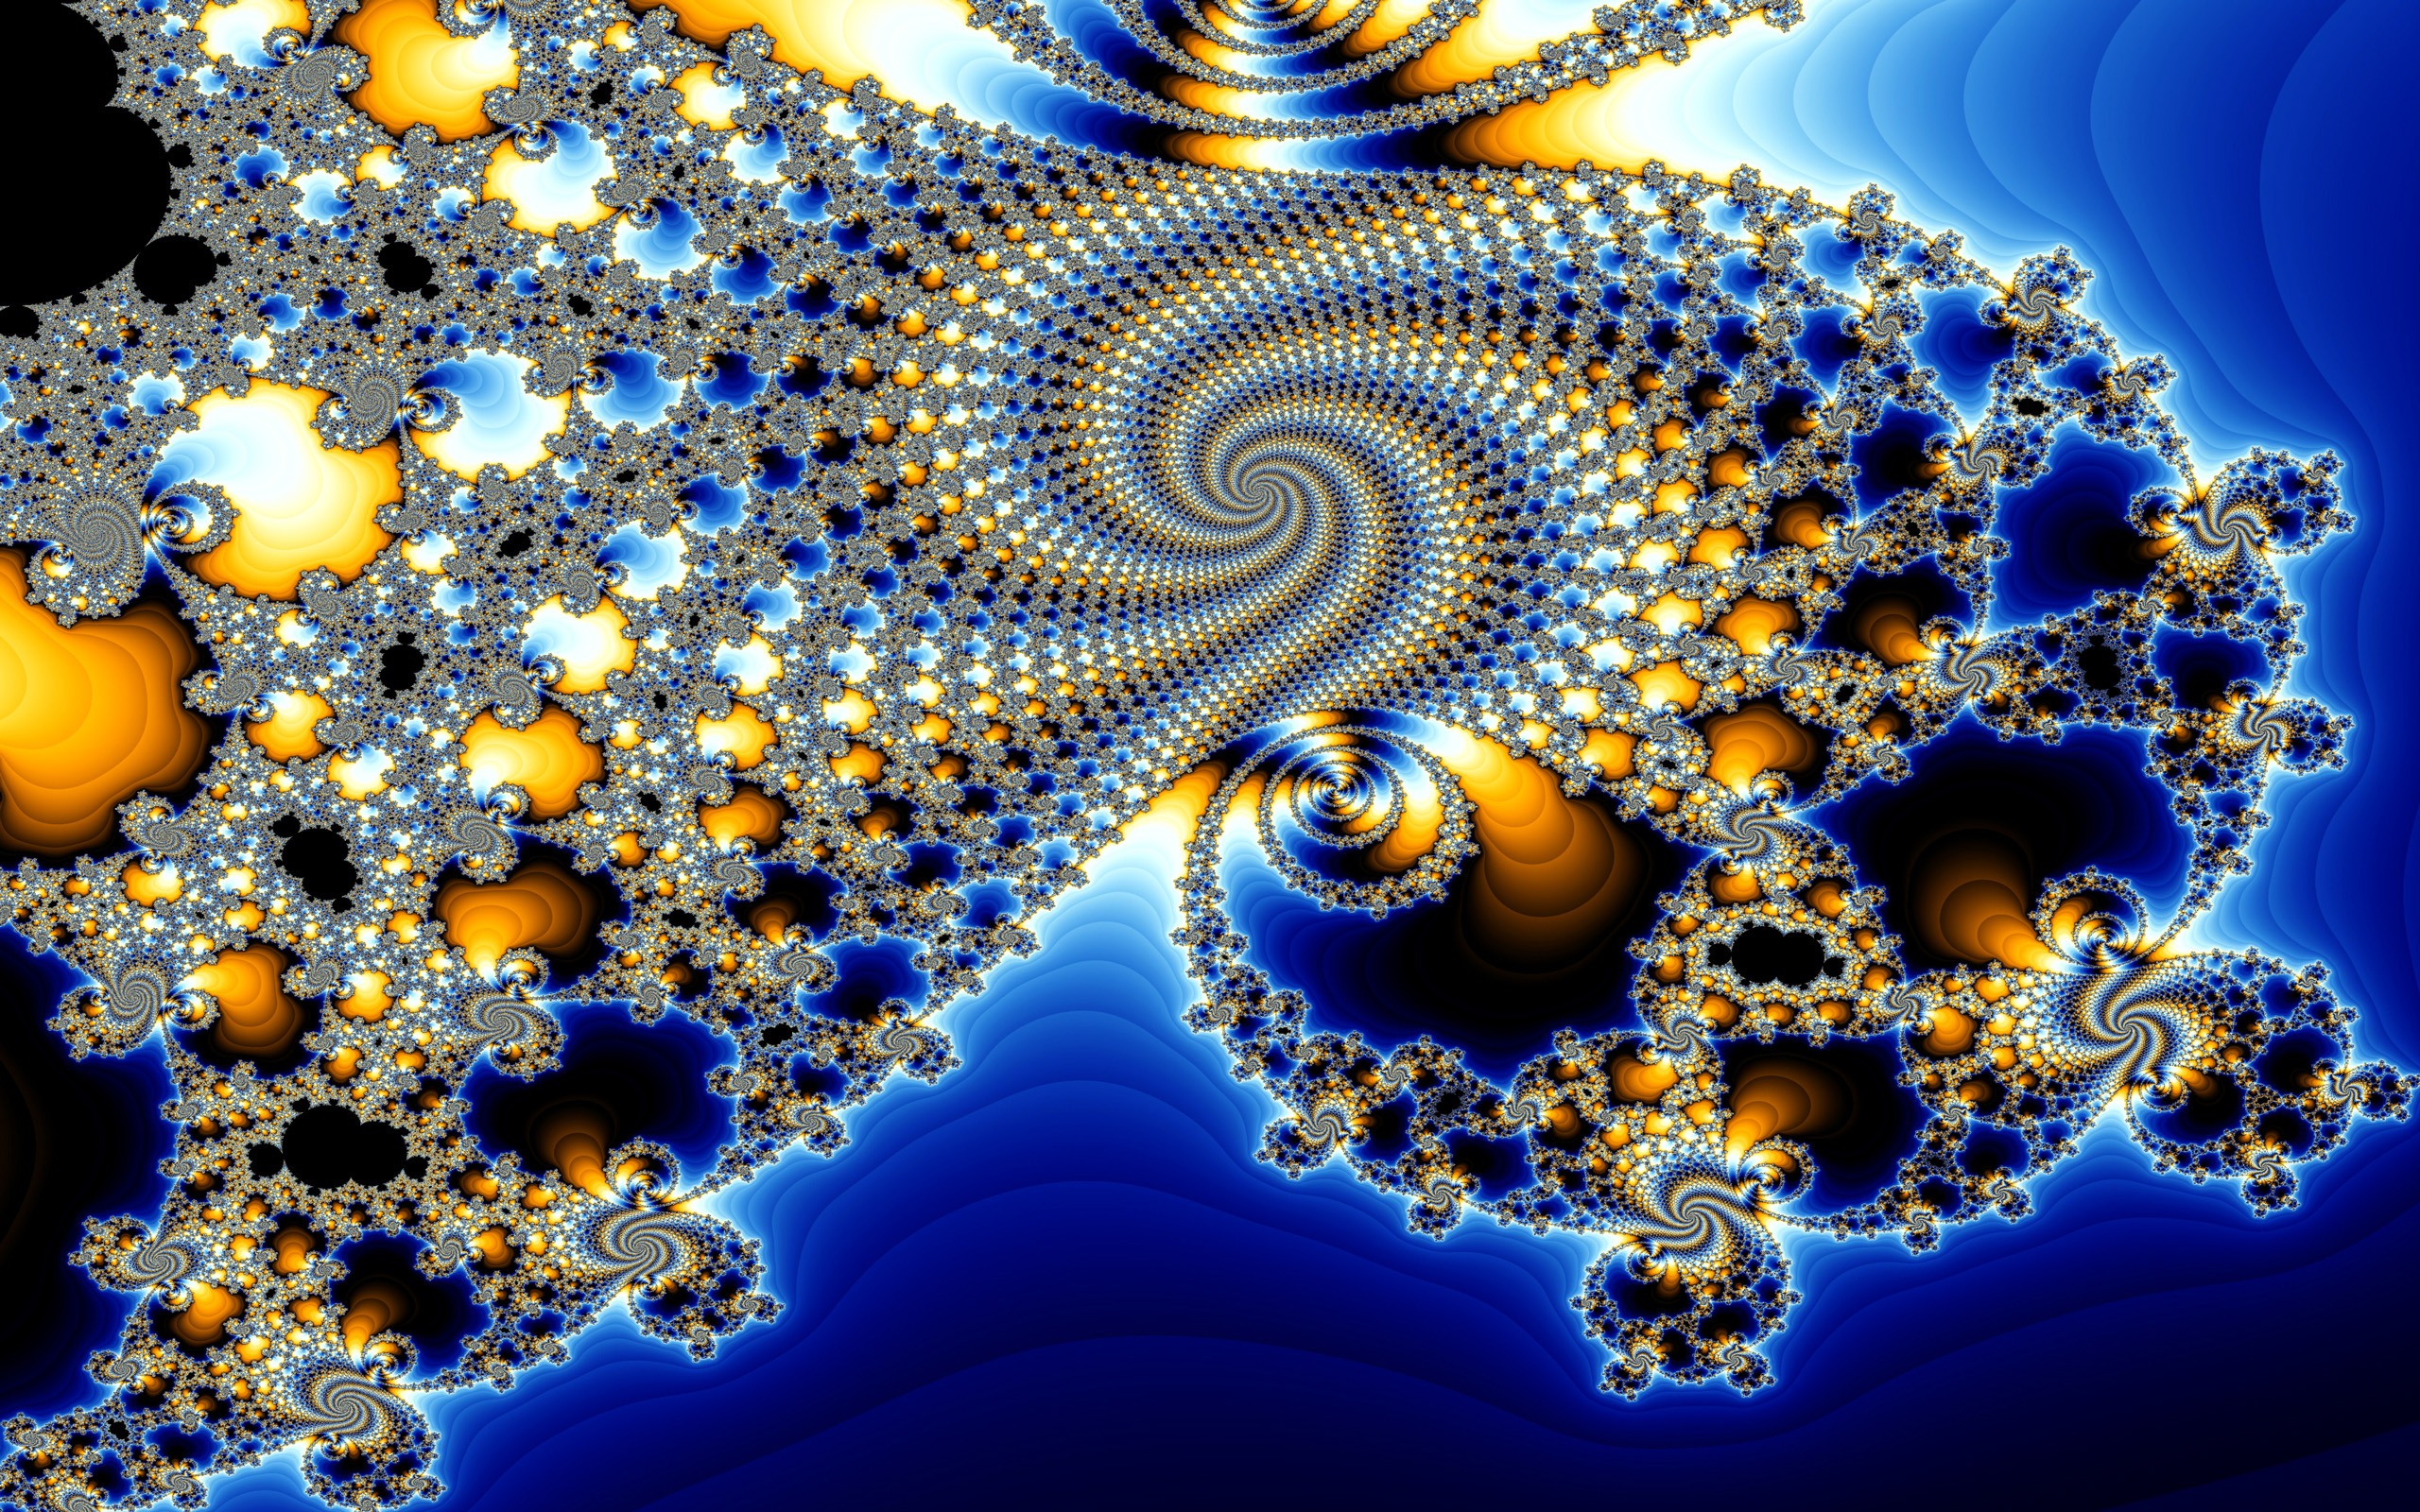 Fractal Wallpapers, Pictures, Images